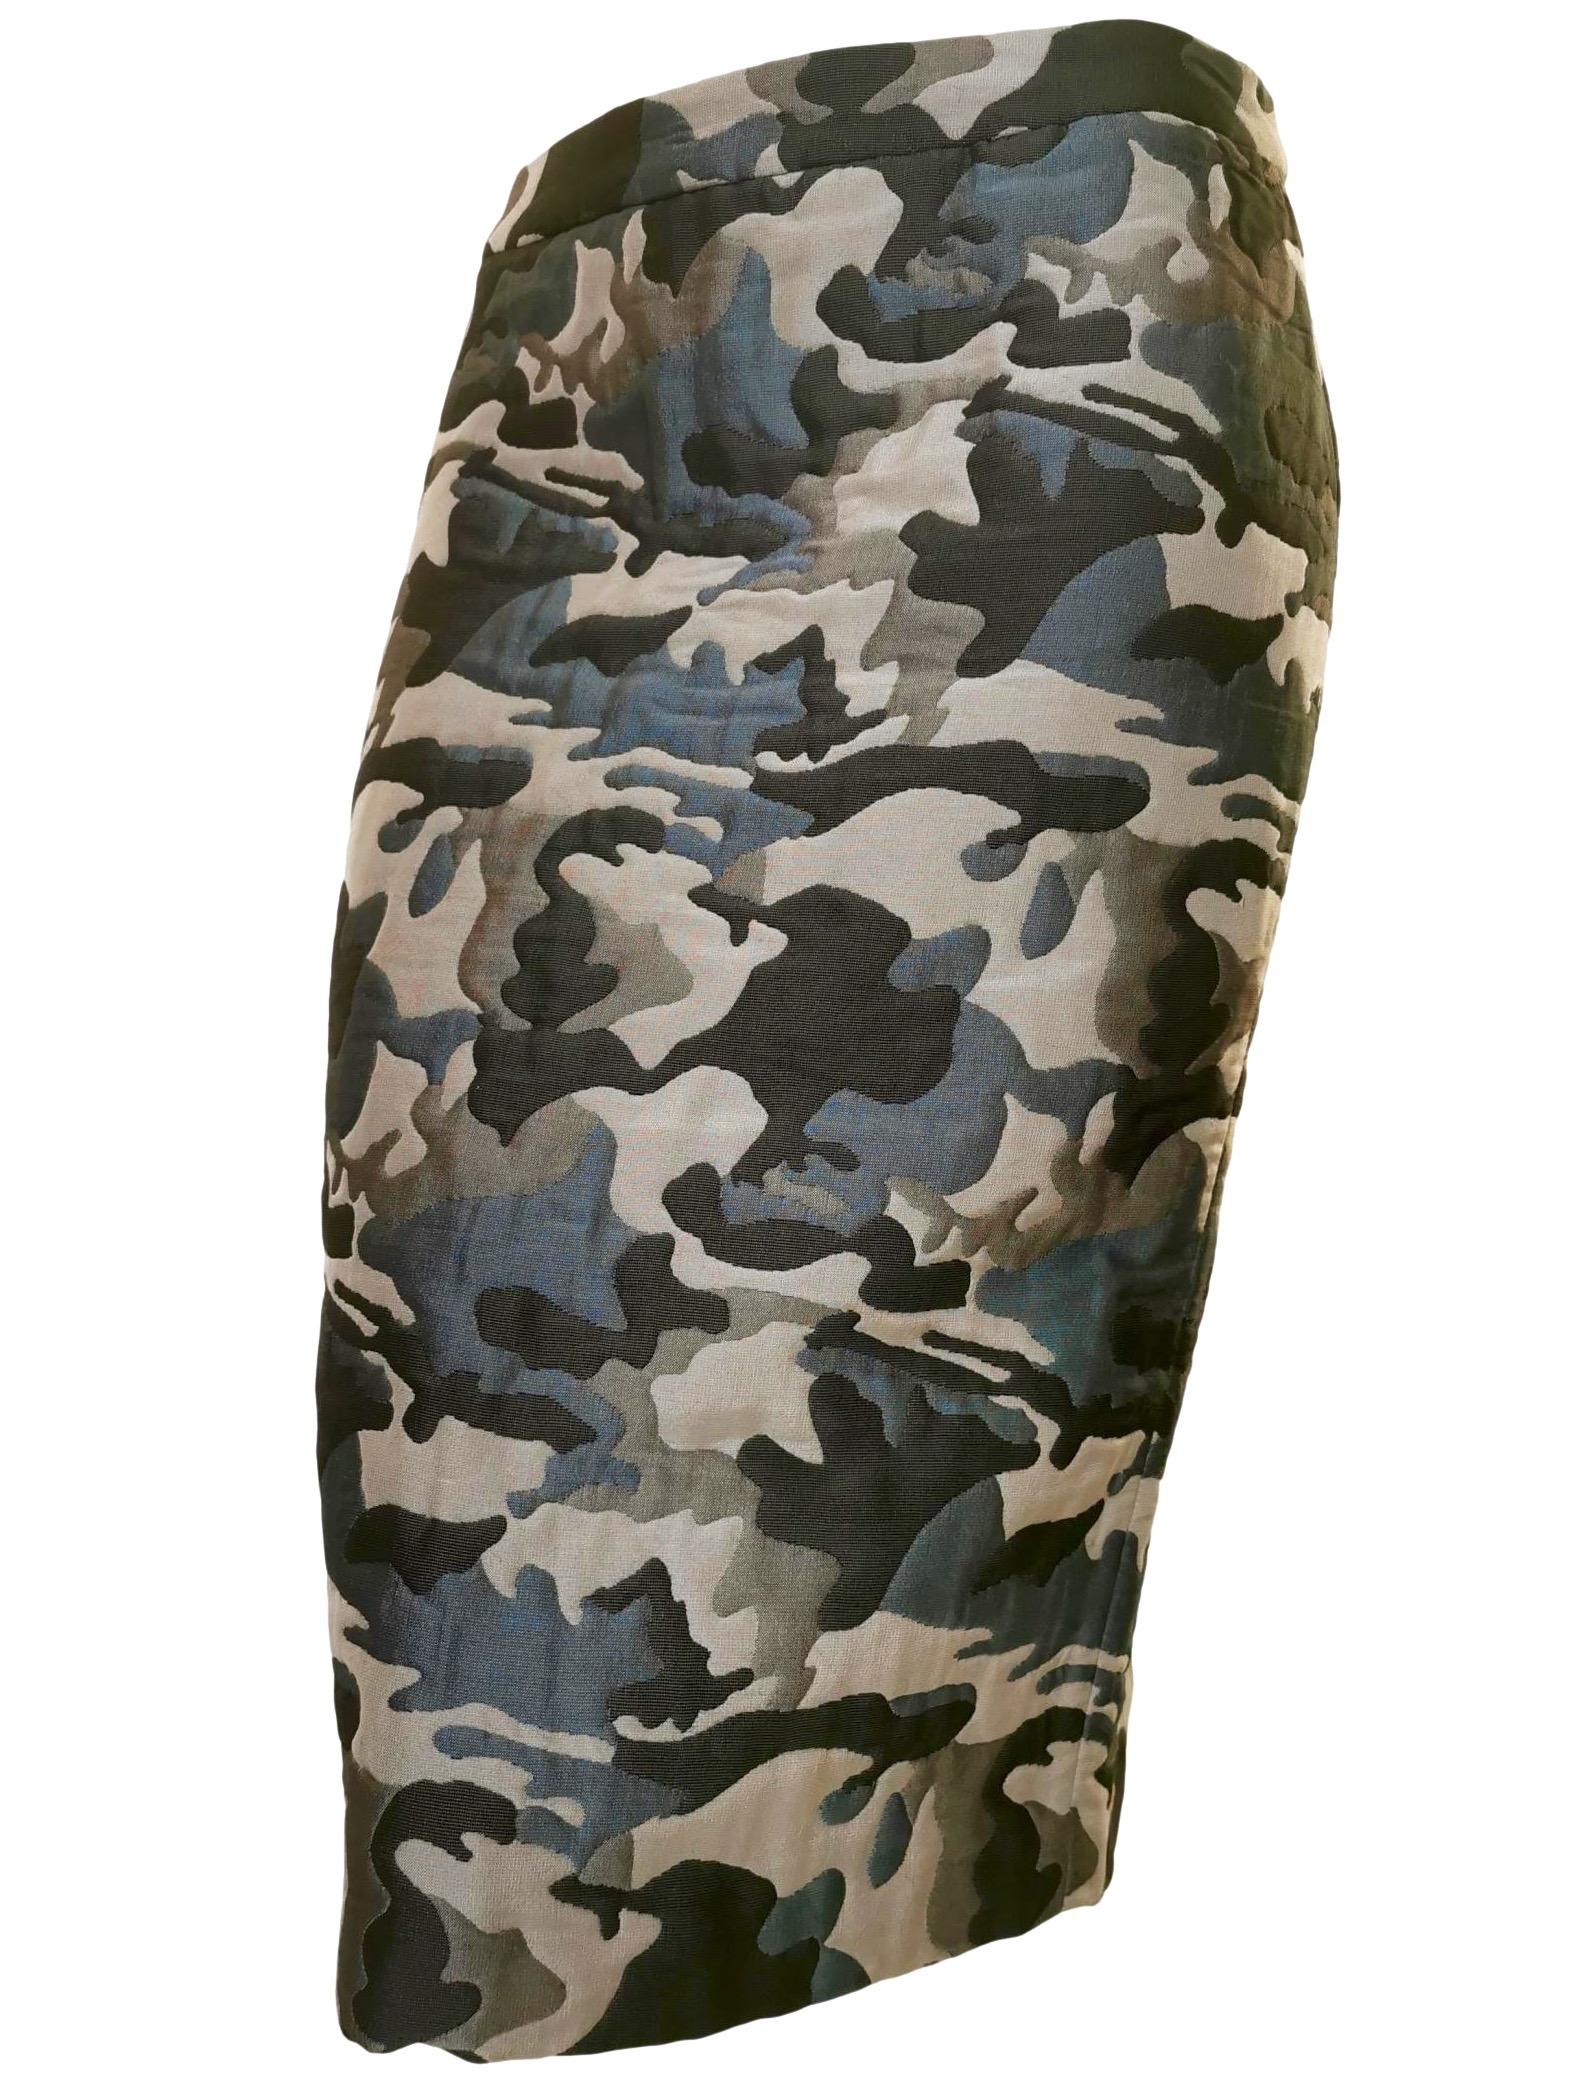 Women's Alexander McQueen Vintage 1990's Quilted Camouflage Fitted Skirt  For Sale